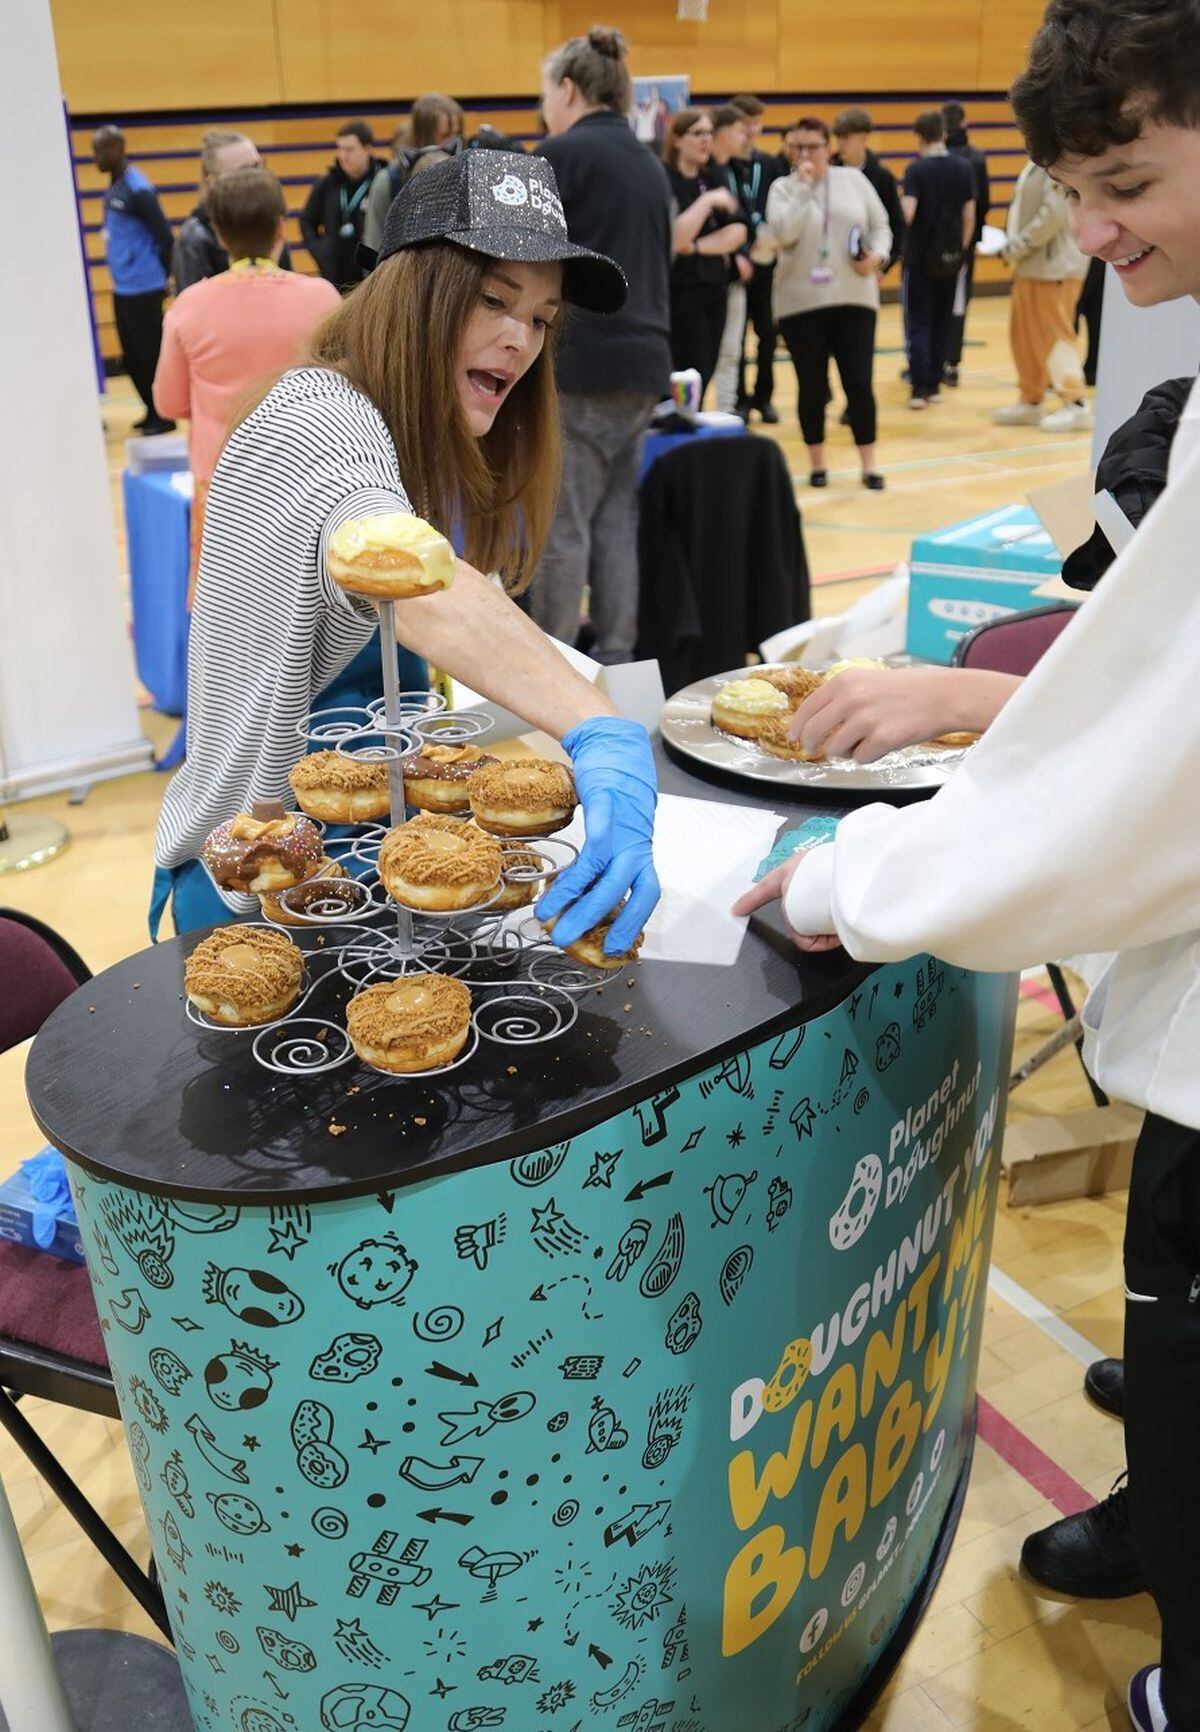 Planet Doughnut's giveaways proved popular